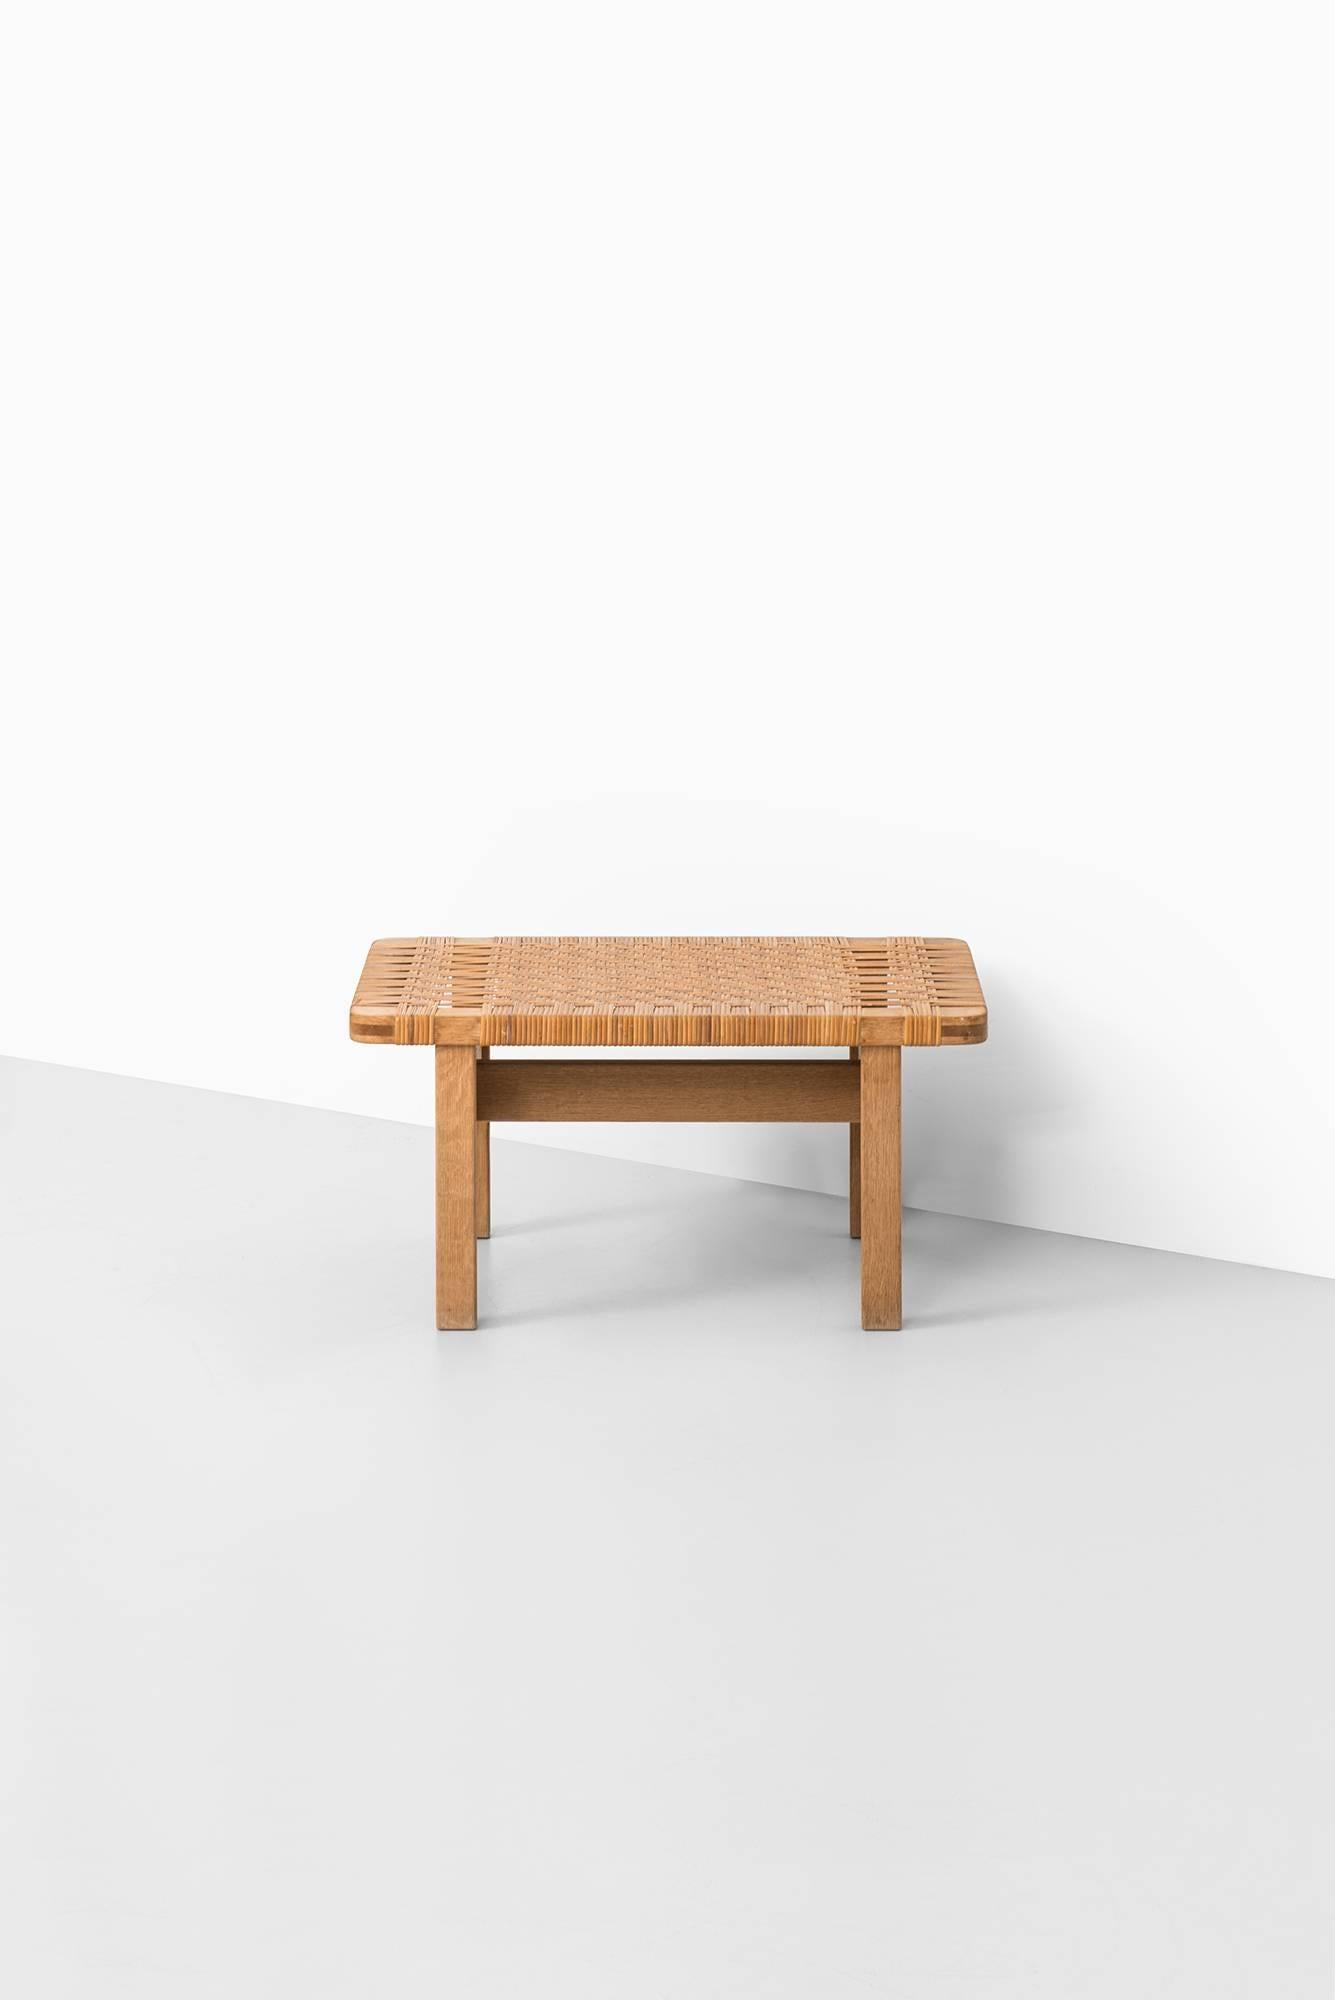 Rare side table in oak and cane designed by Børge Mogensen. Produced by Fredericia stolefabrik in Denmark.